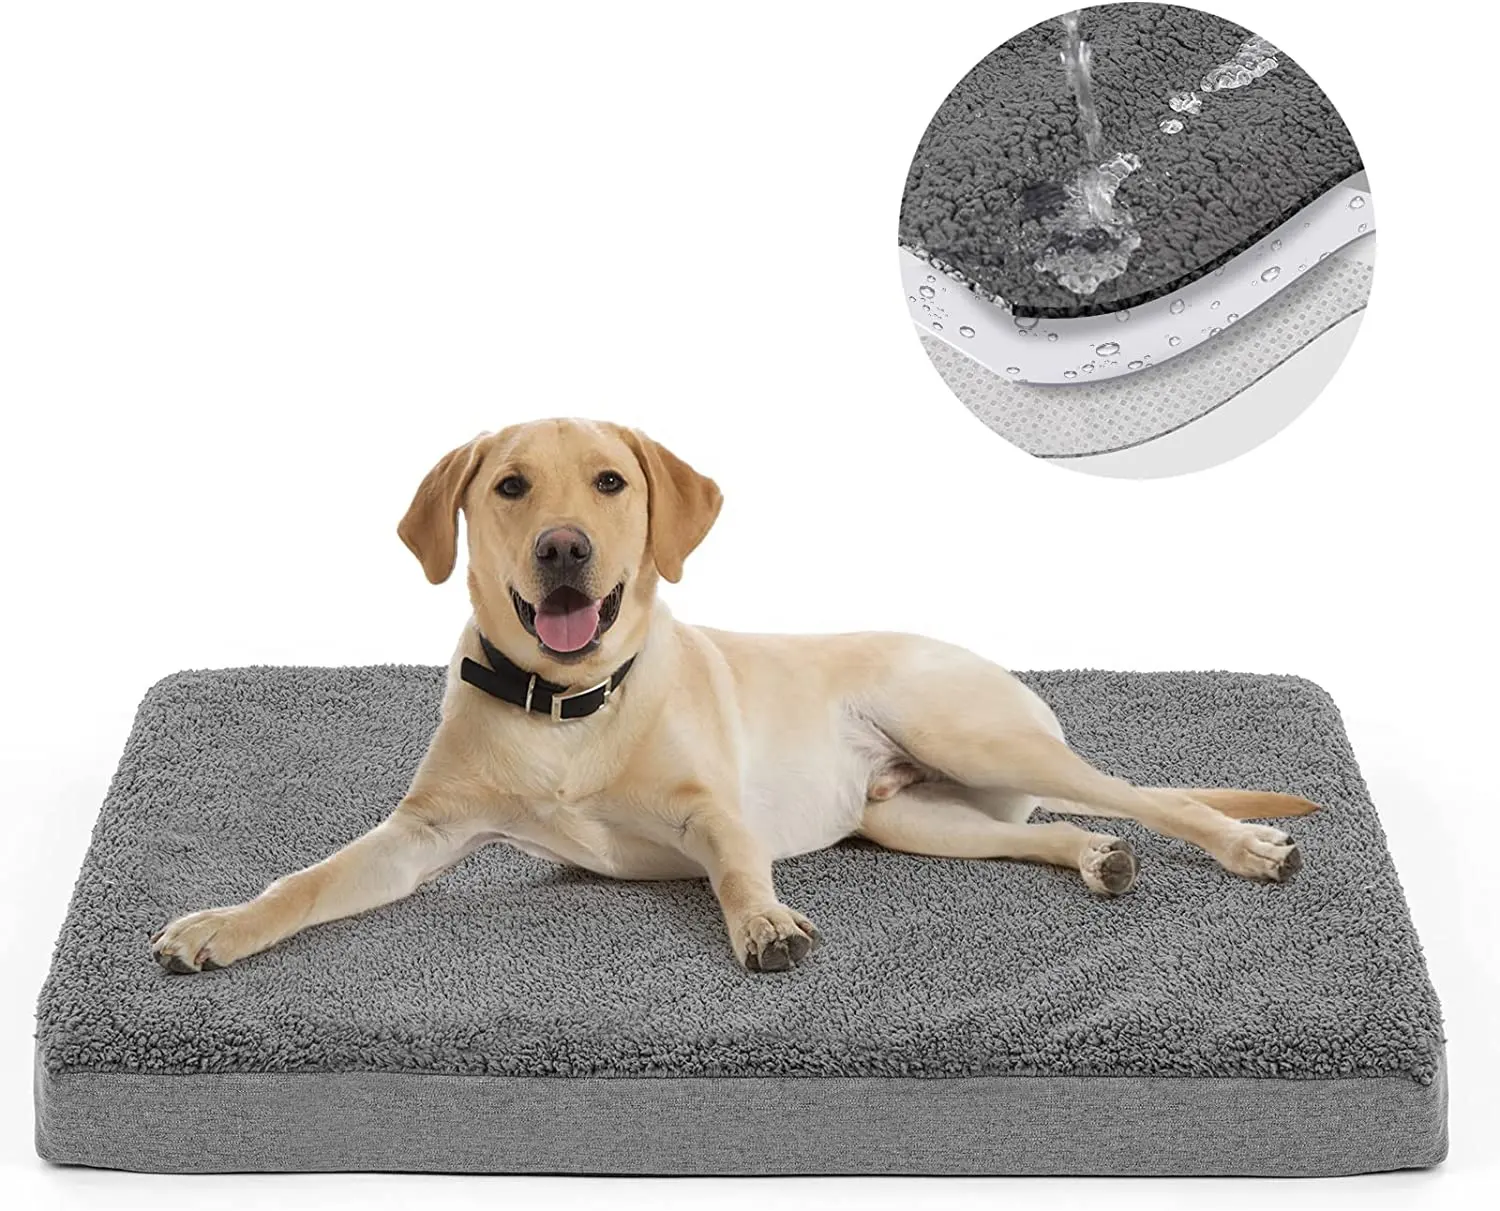 Memory Foam Dog Bed Pet Beds Waterproof Washable Cover Plush Large for Dog Accessories